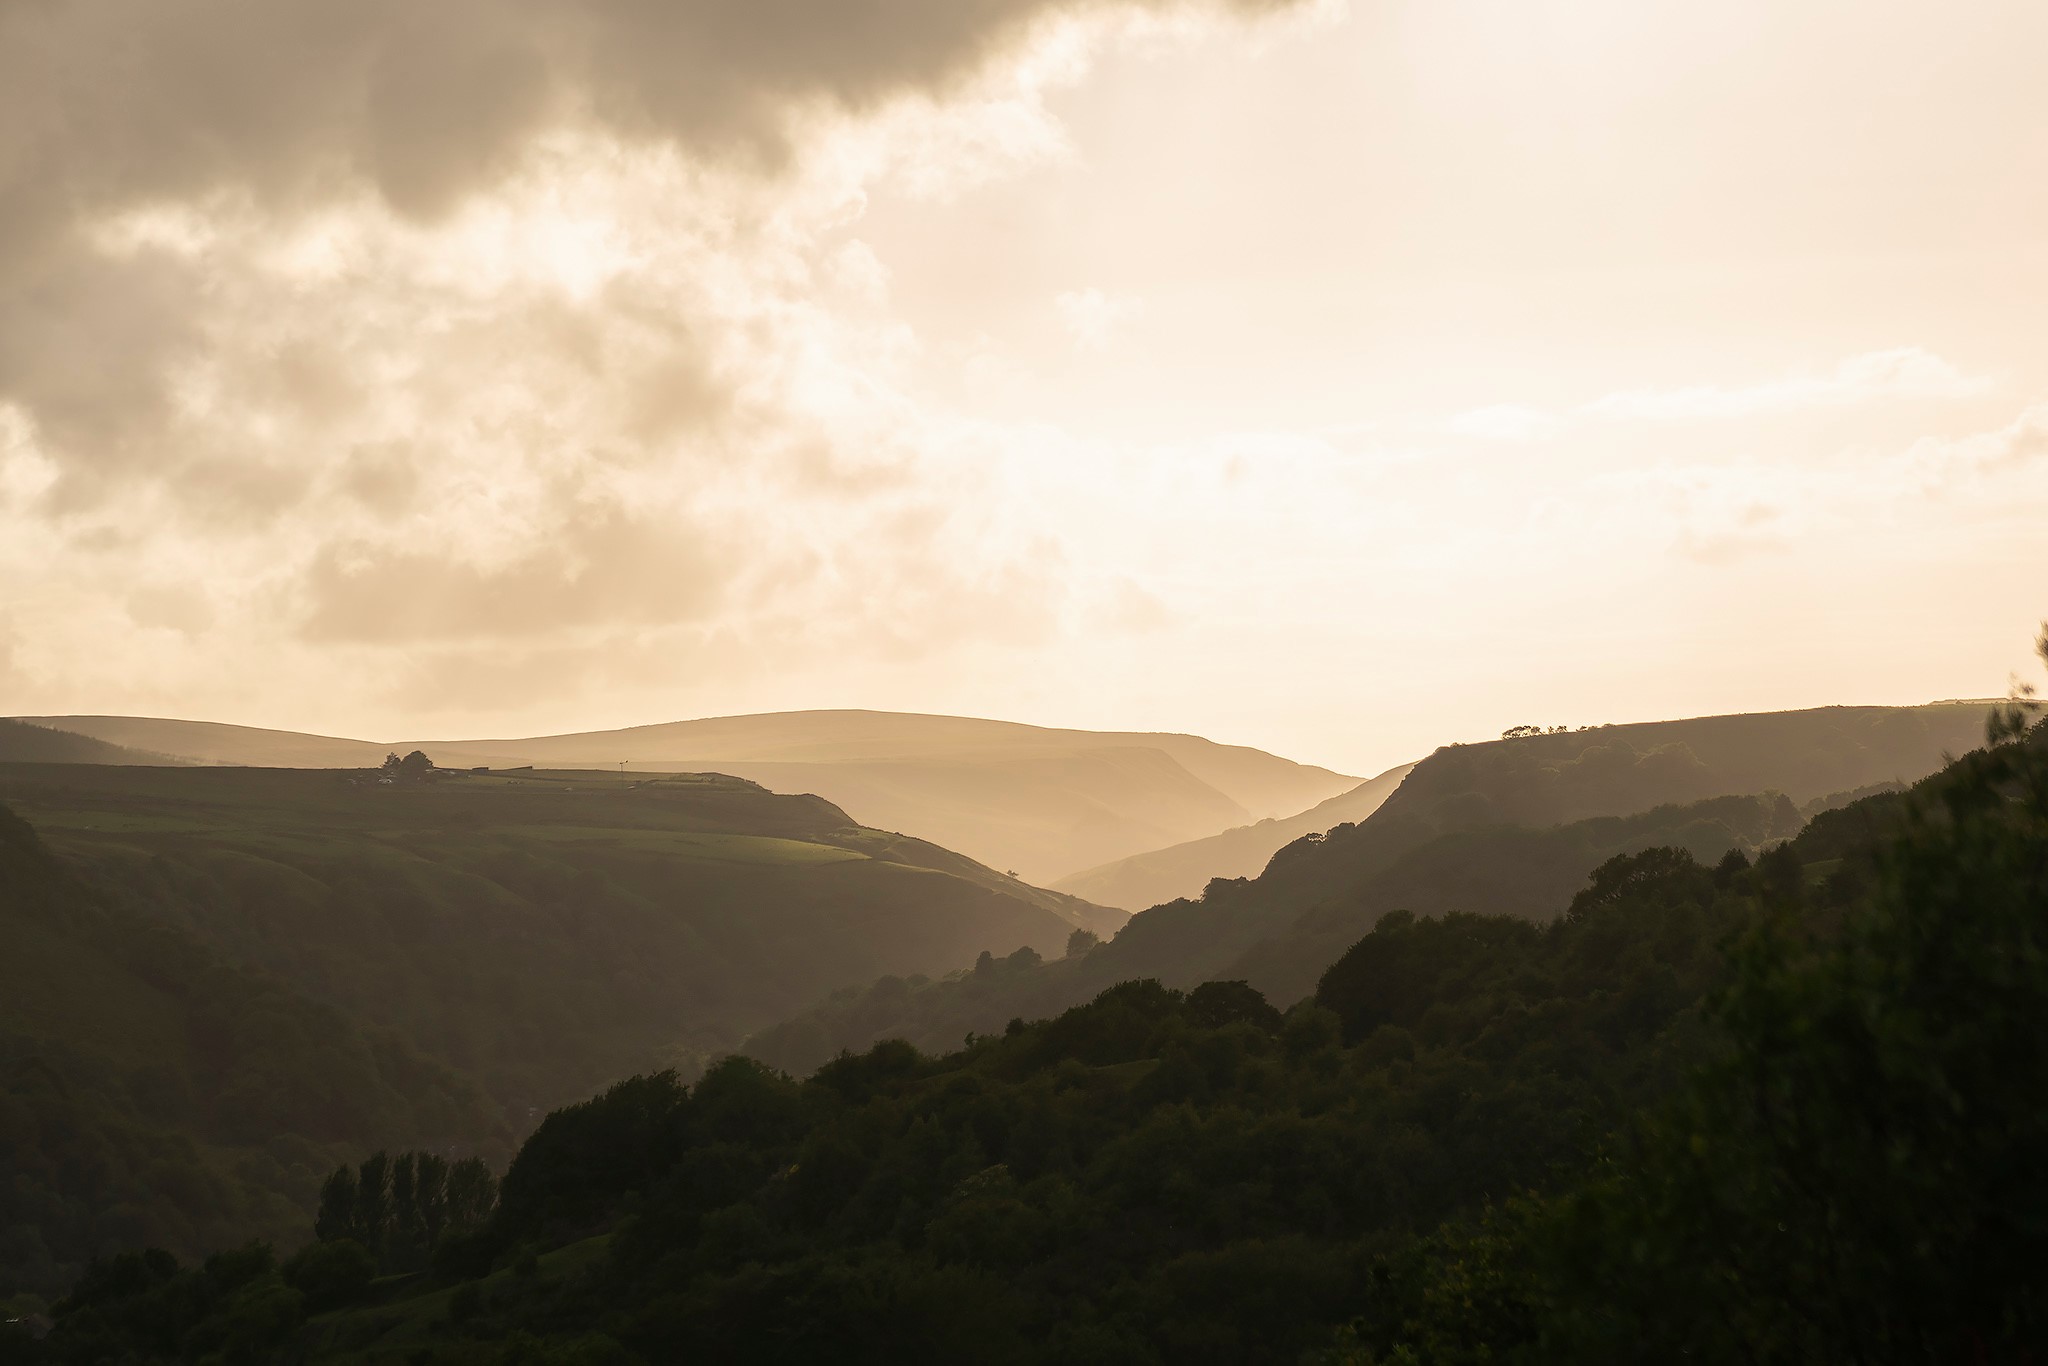 A high-contrast view looking up the valley from Todmorden with graduated silhouttes of the valley sides